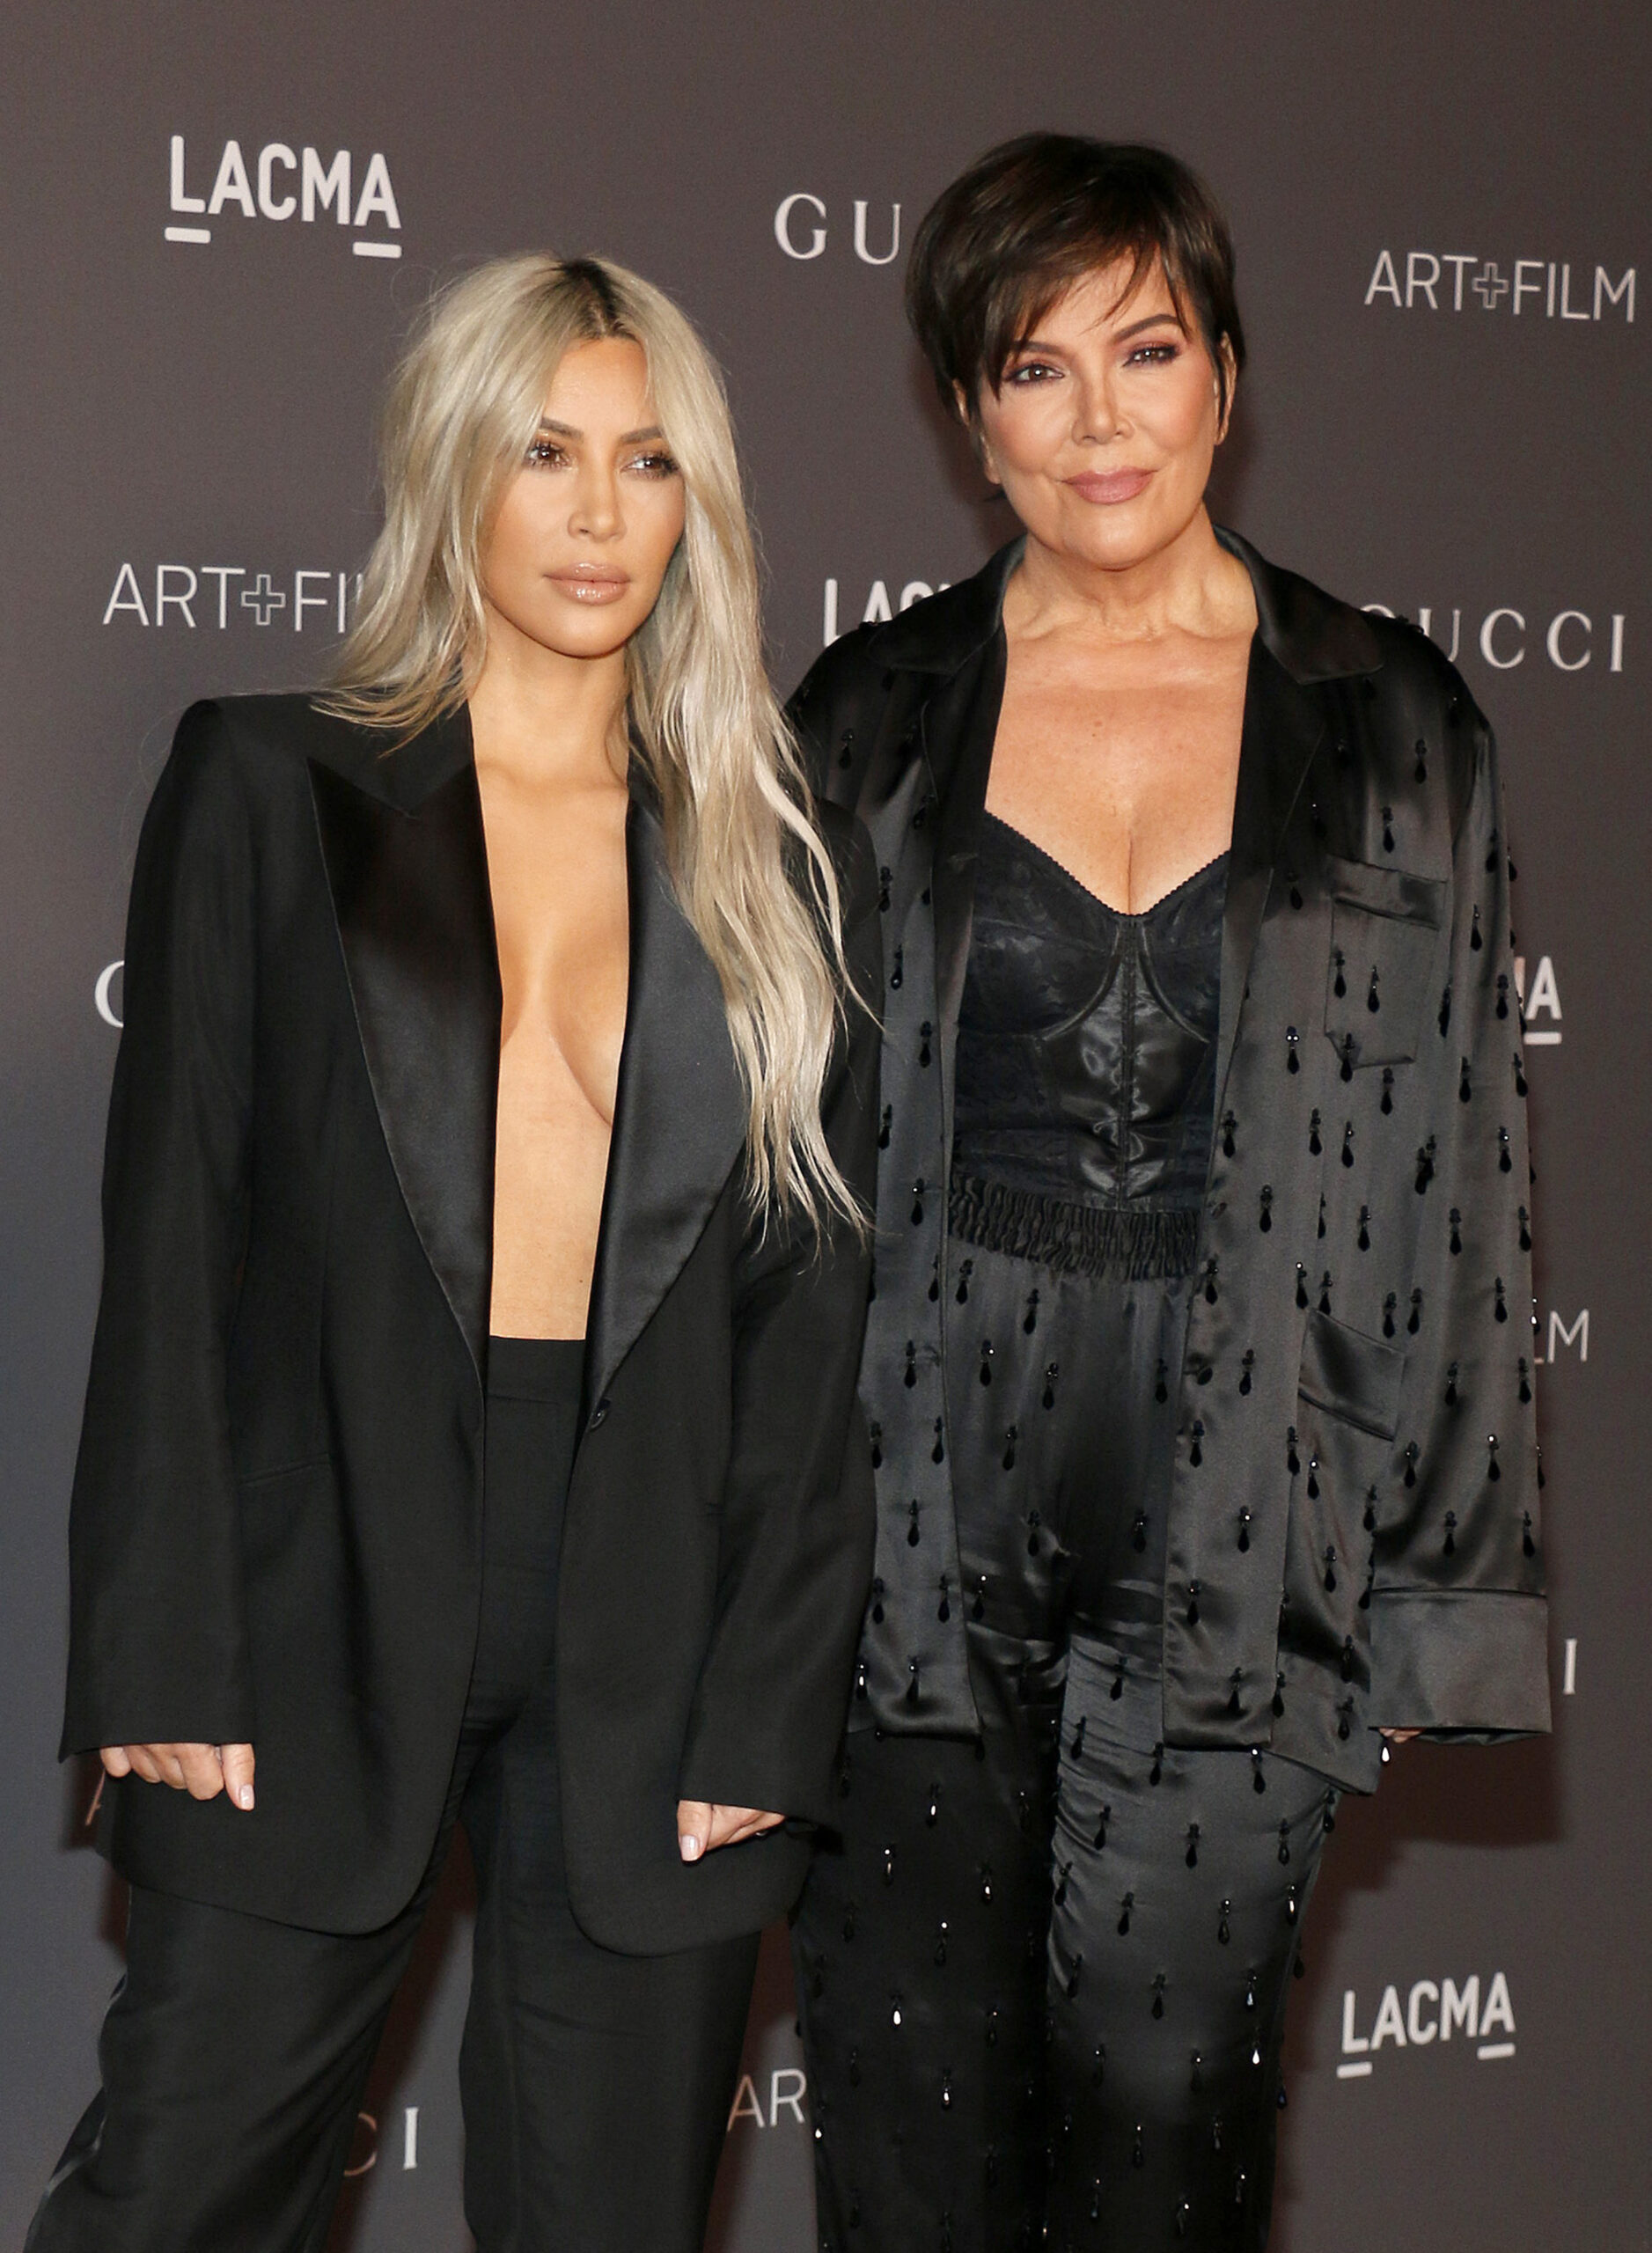 Kim Kardashian and Kris Jenner at the 2017 LACMA Art + Film Gala held at the LACMA in Los Angeles, USA on November 4, 2017. (Tinseltown / Shutterstock.com)